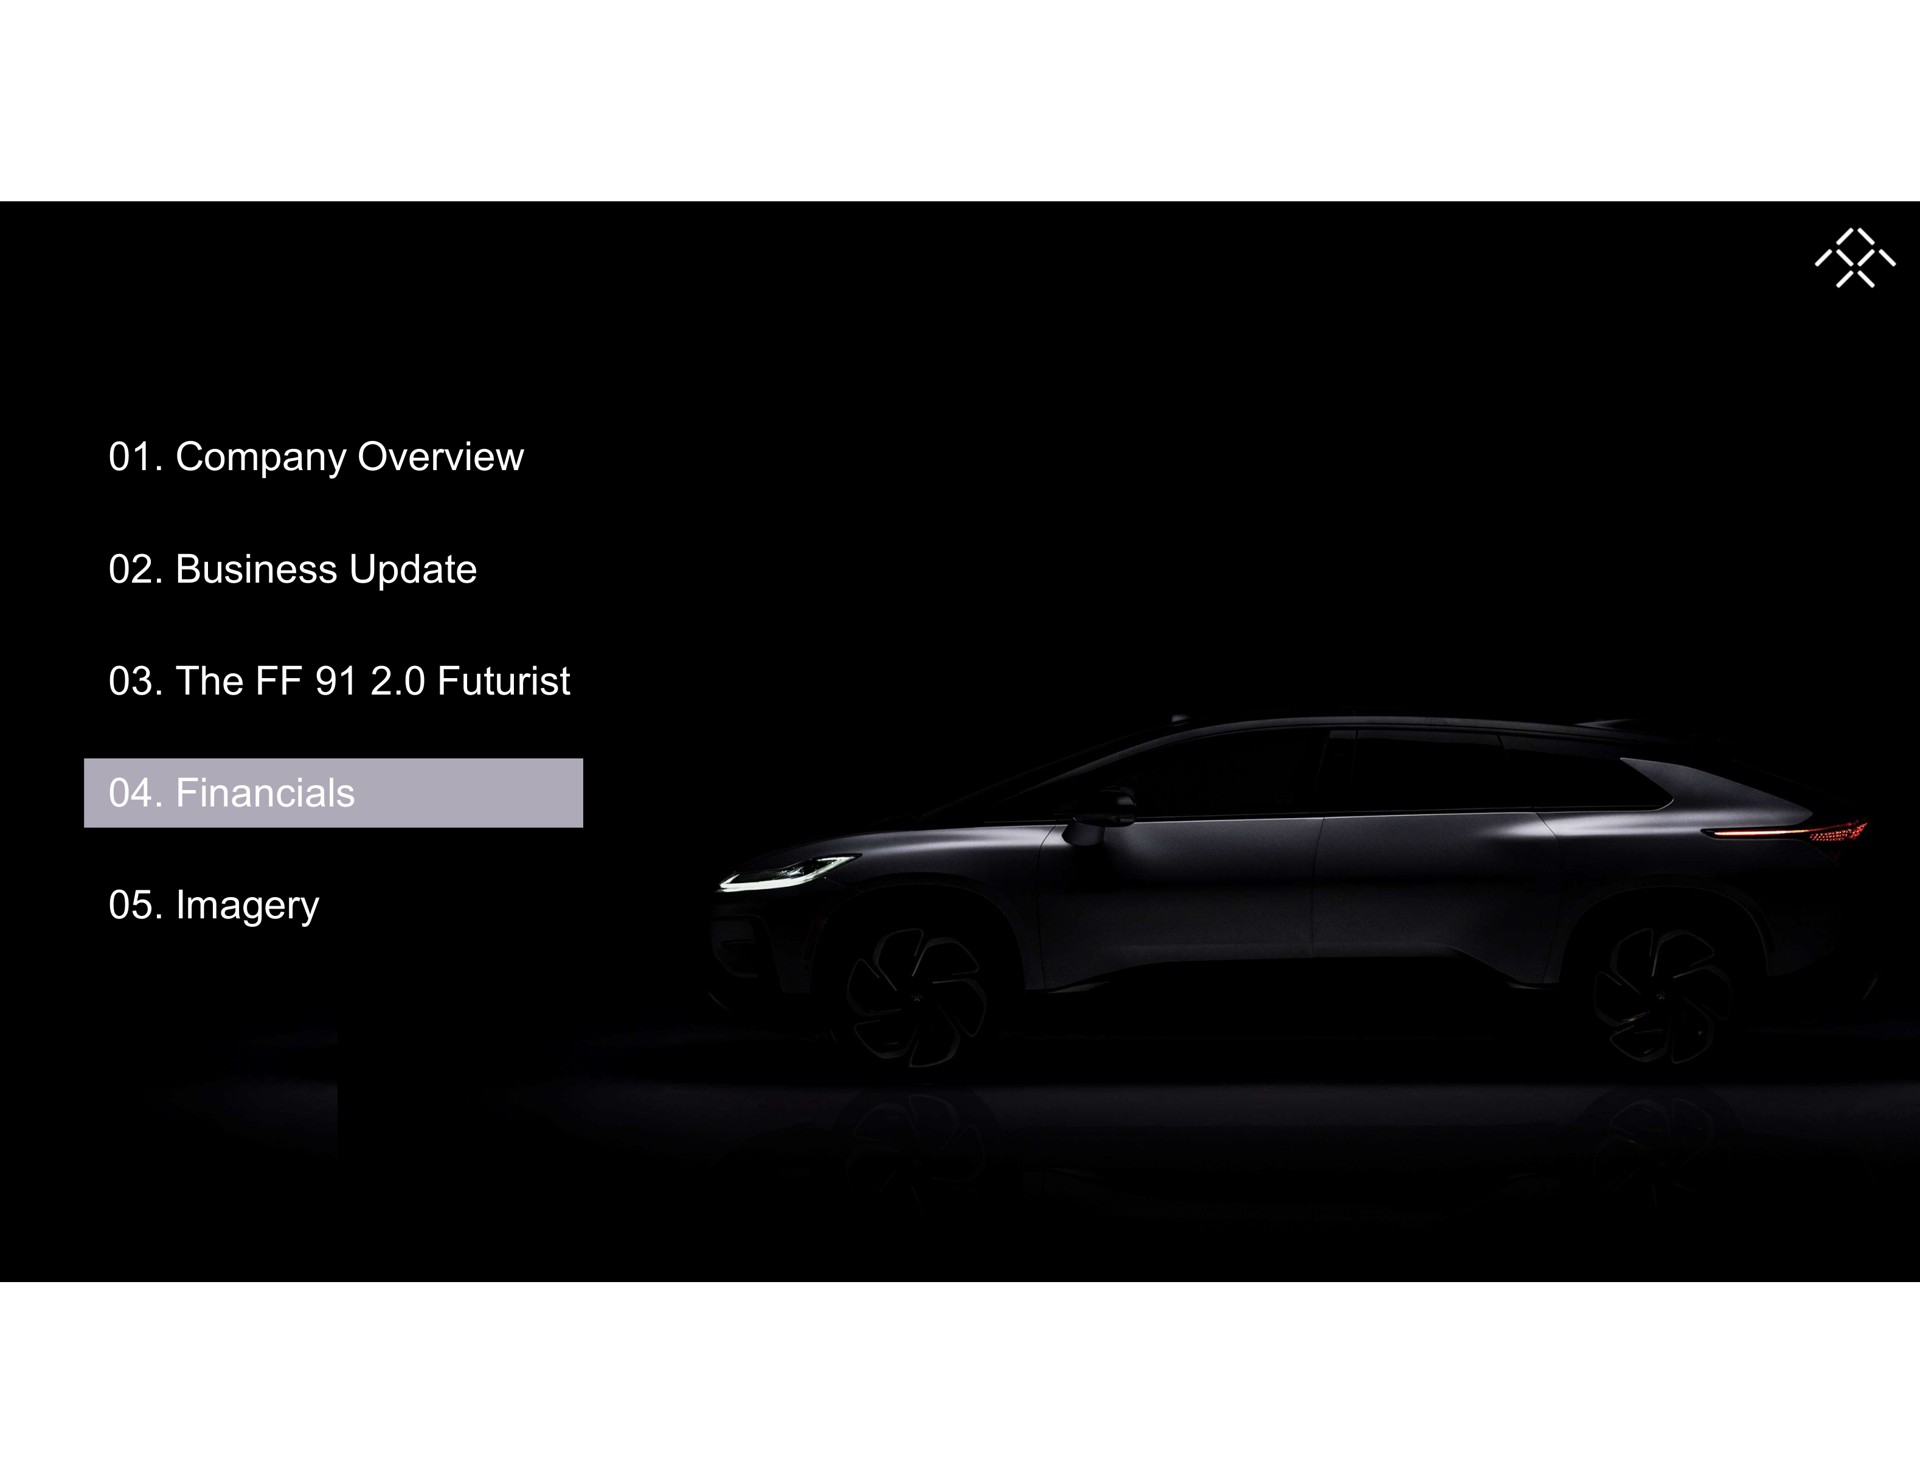 company overview company overview business update business update the futurist the futurist imagery imagery | Faraday Future